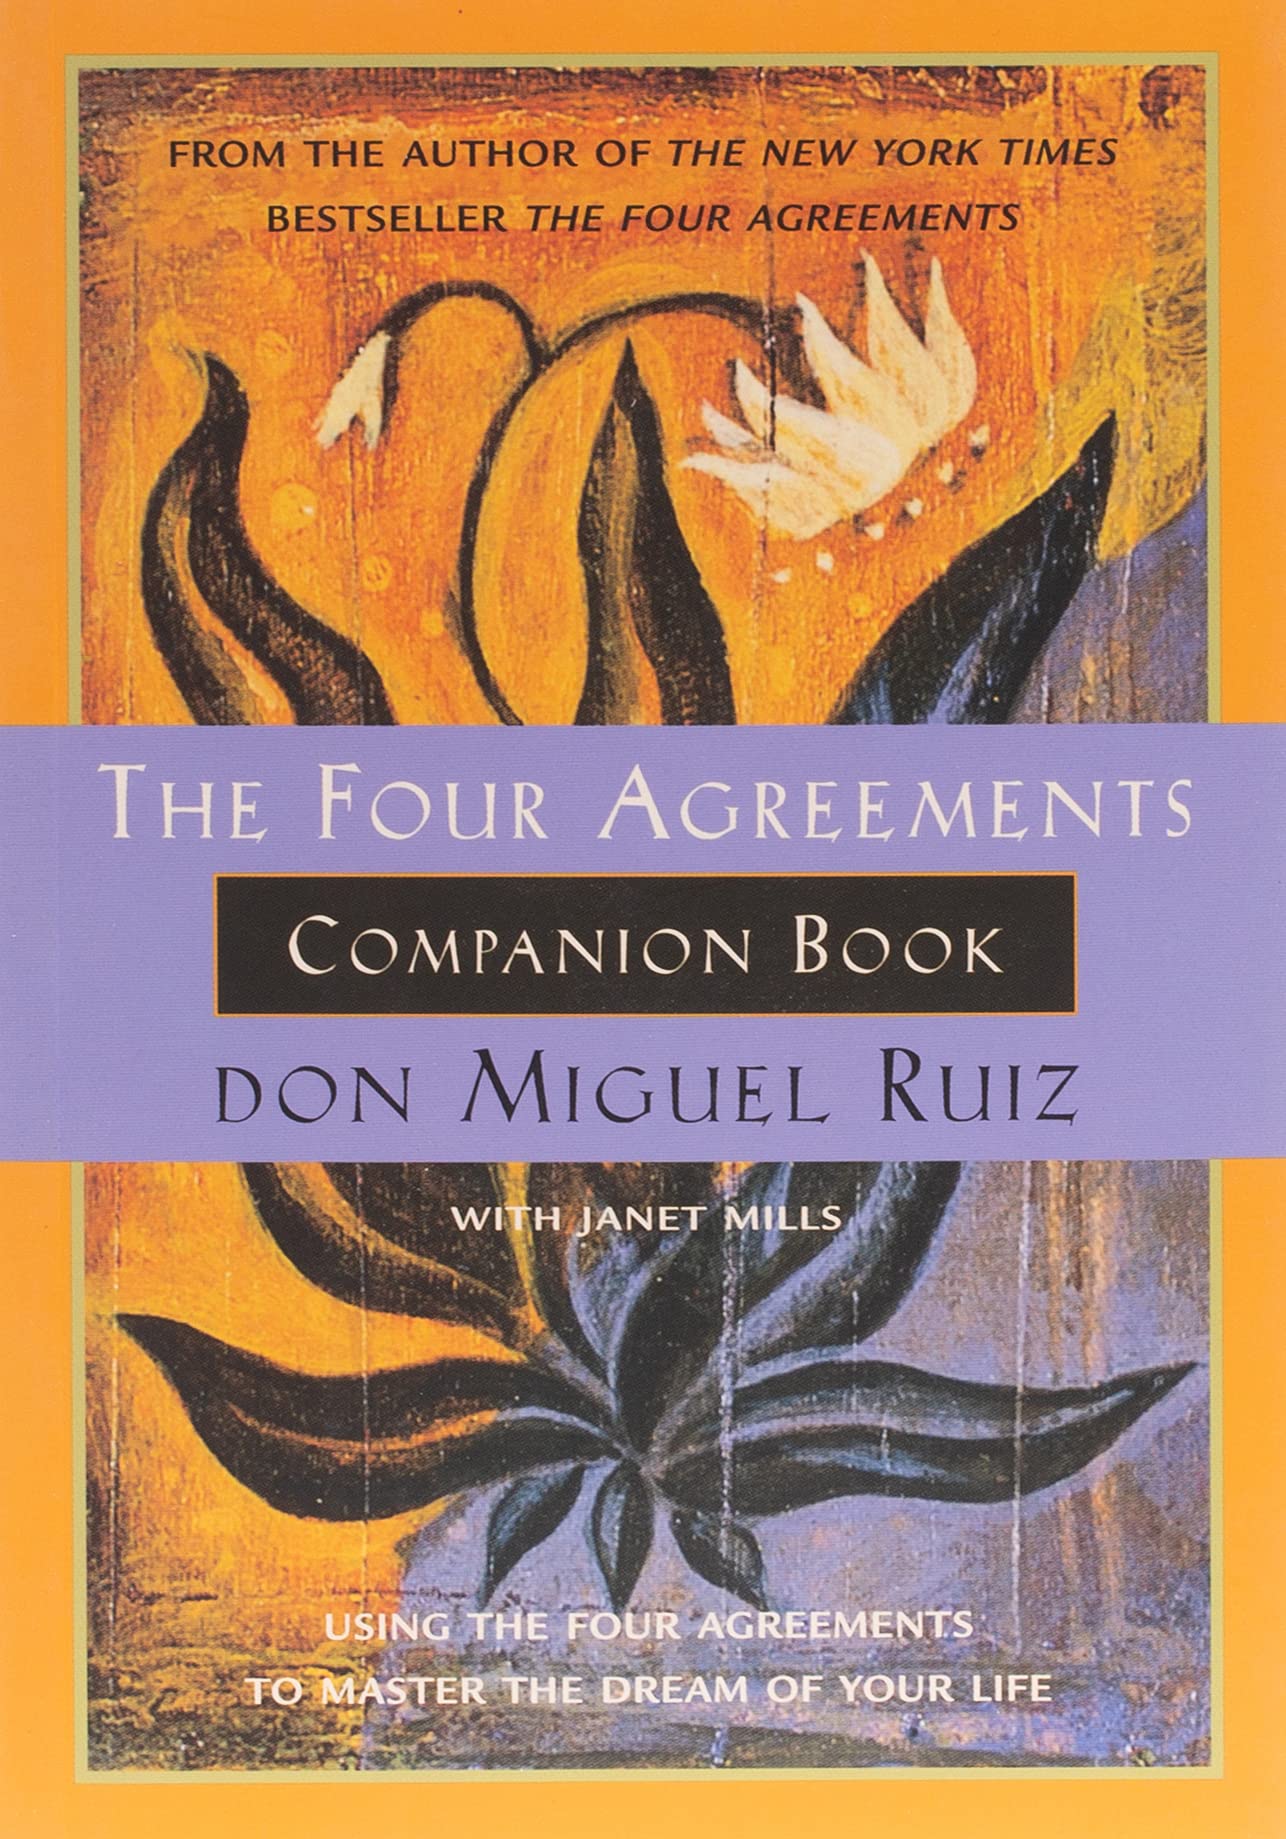 The Four Agreements Companion Book: Using the Four Agreements to Master the Dream of Your Life - Toltec Wisdom (Paperback)